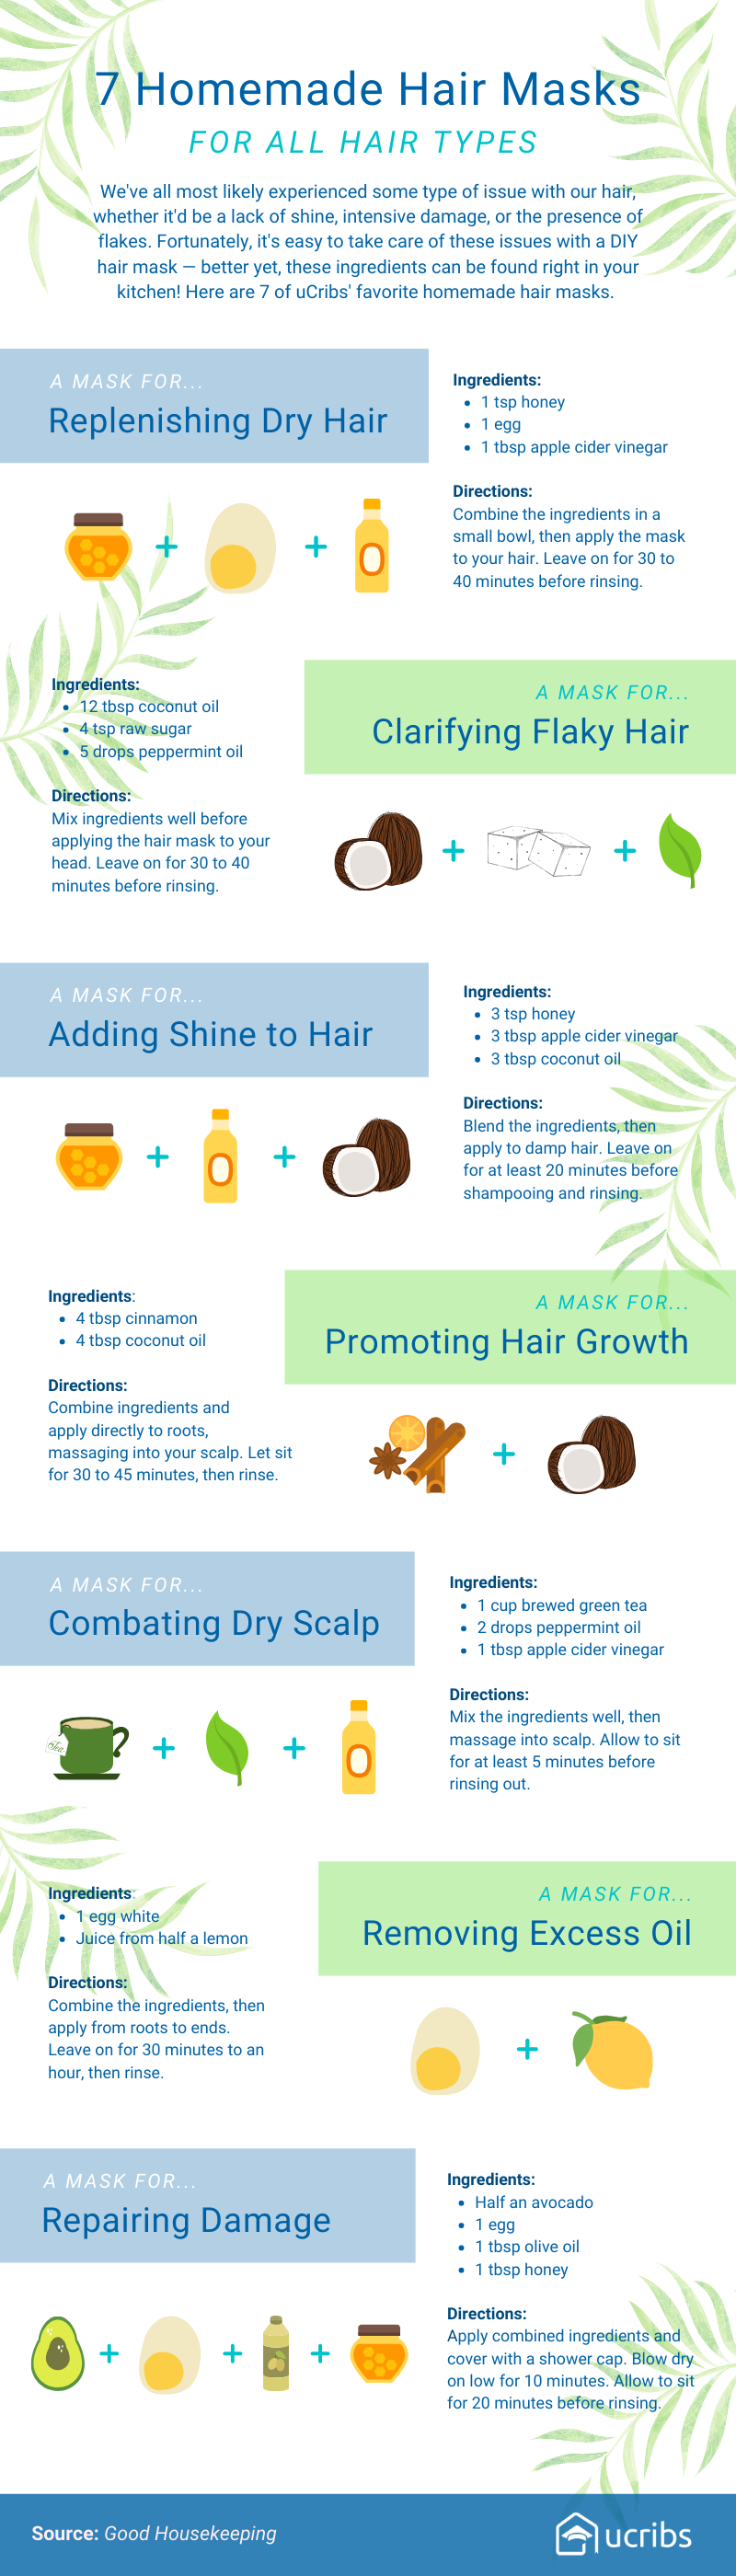 diy hair masks, haircare, at home haircare, natural beauty, diy project, do it yourself, infographic, recipe